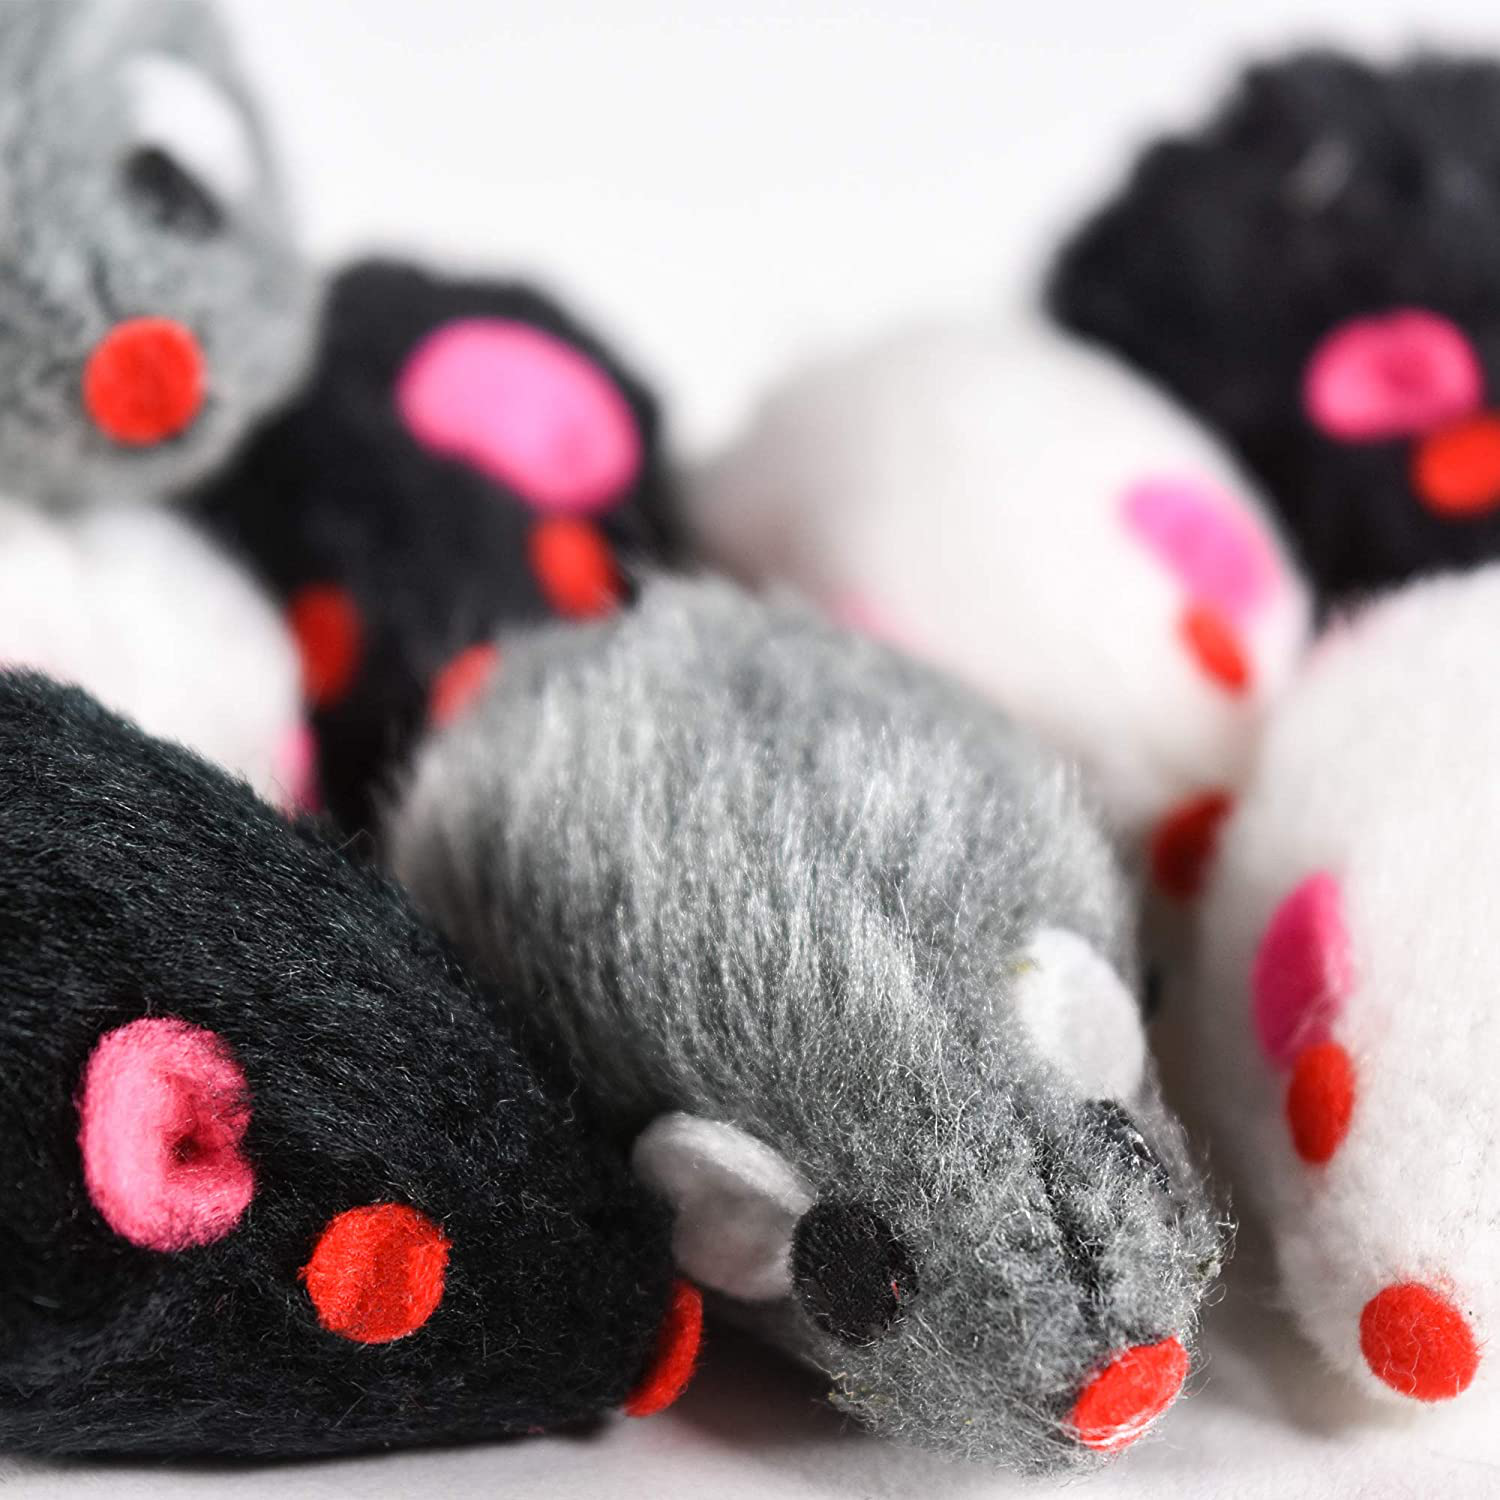 Penn Plax Play Fur Mice Cat Toys – Mixed Bag of 12 Play Mice with Rattling Sounds – 3 Color Variety Pack - CAT531, Black and White